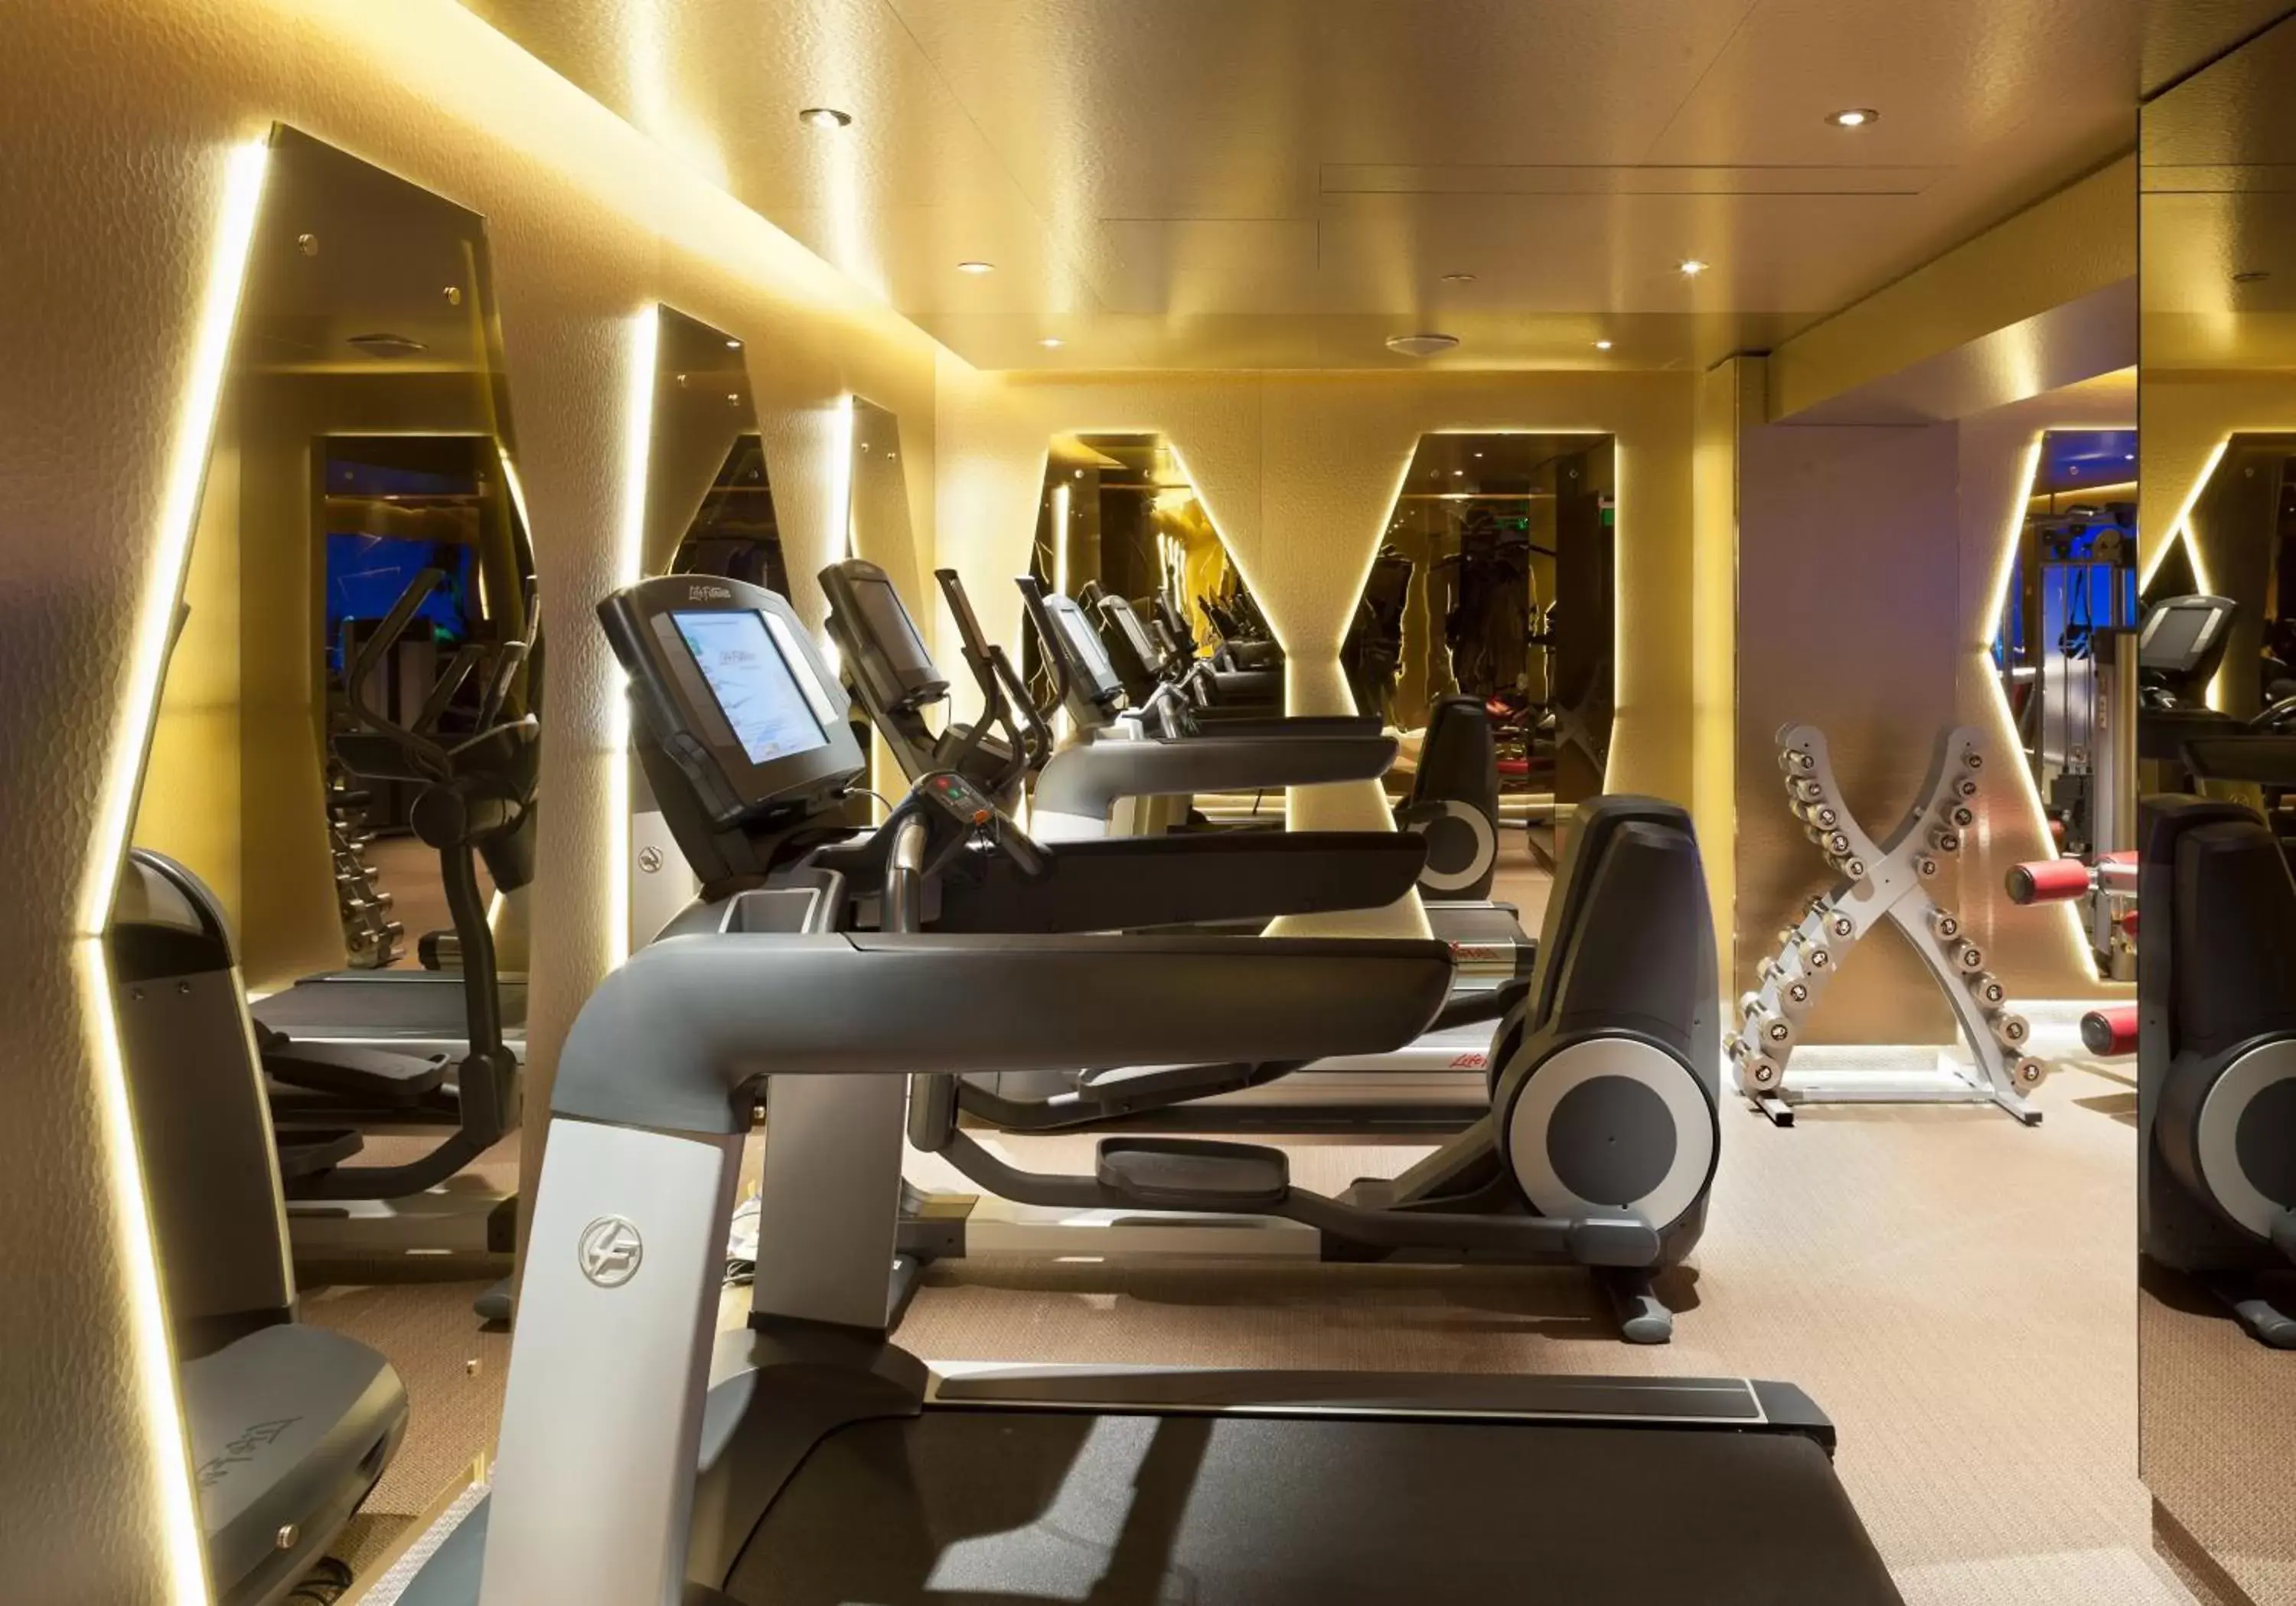 Fitness centre/facilities, Fitness Center/Facilities in New Hotel